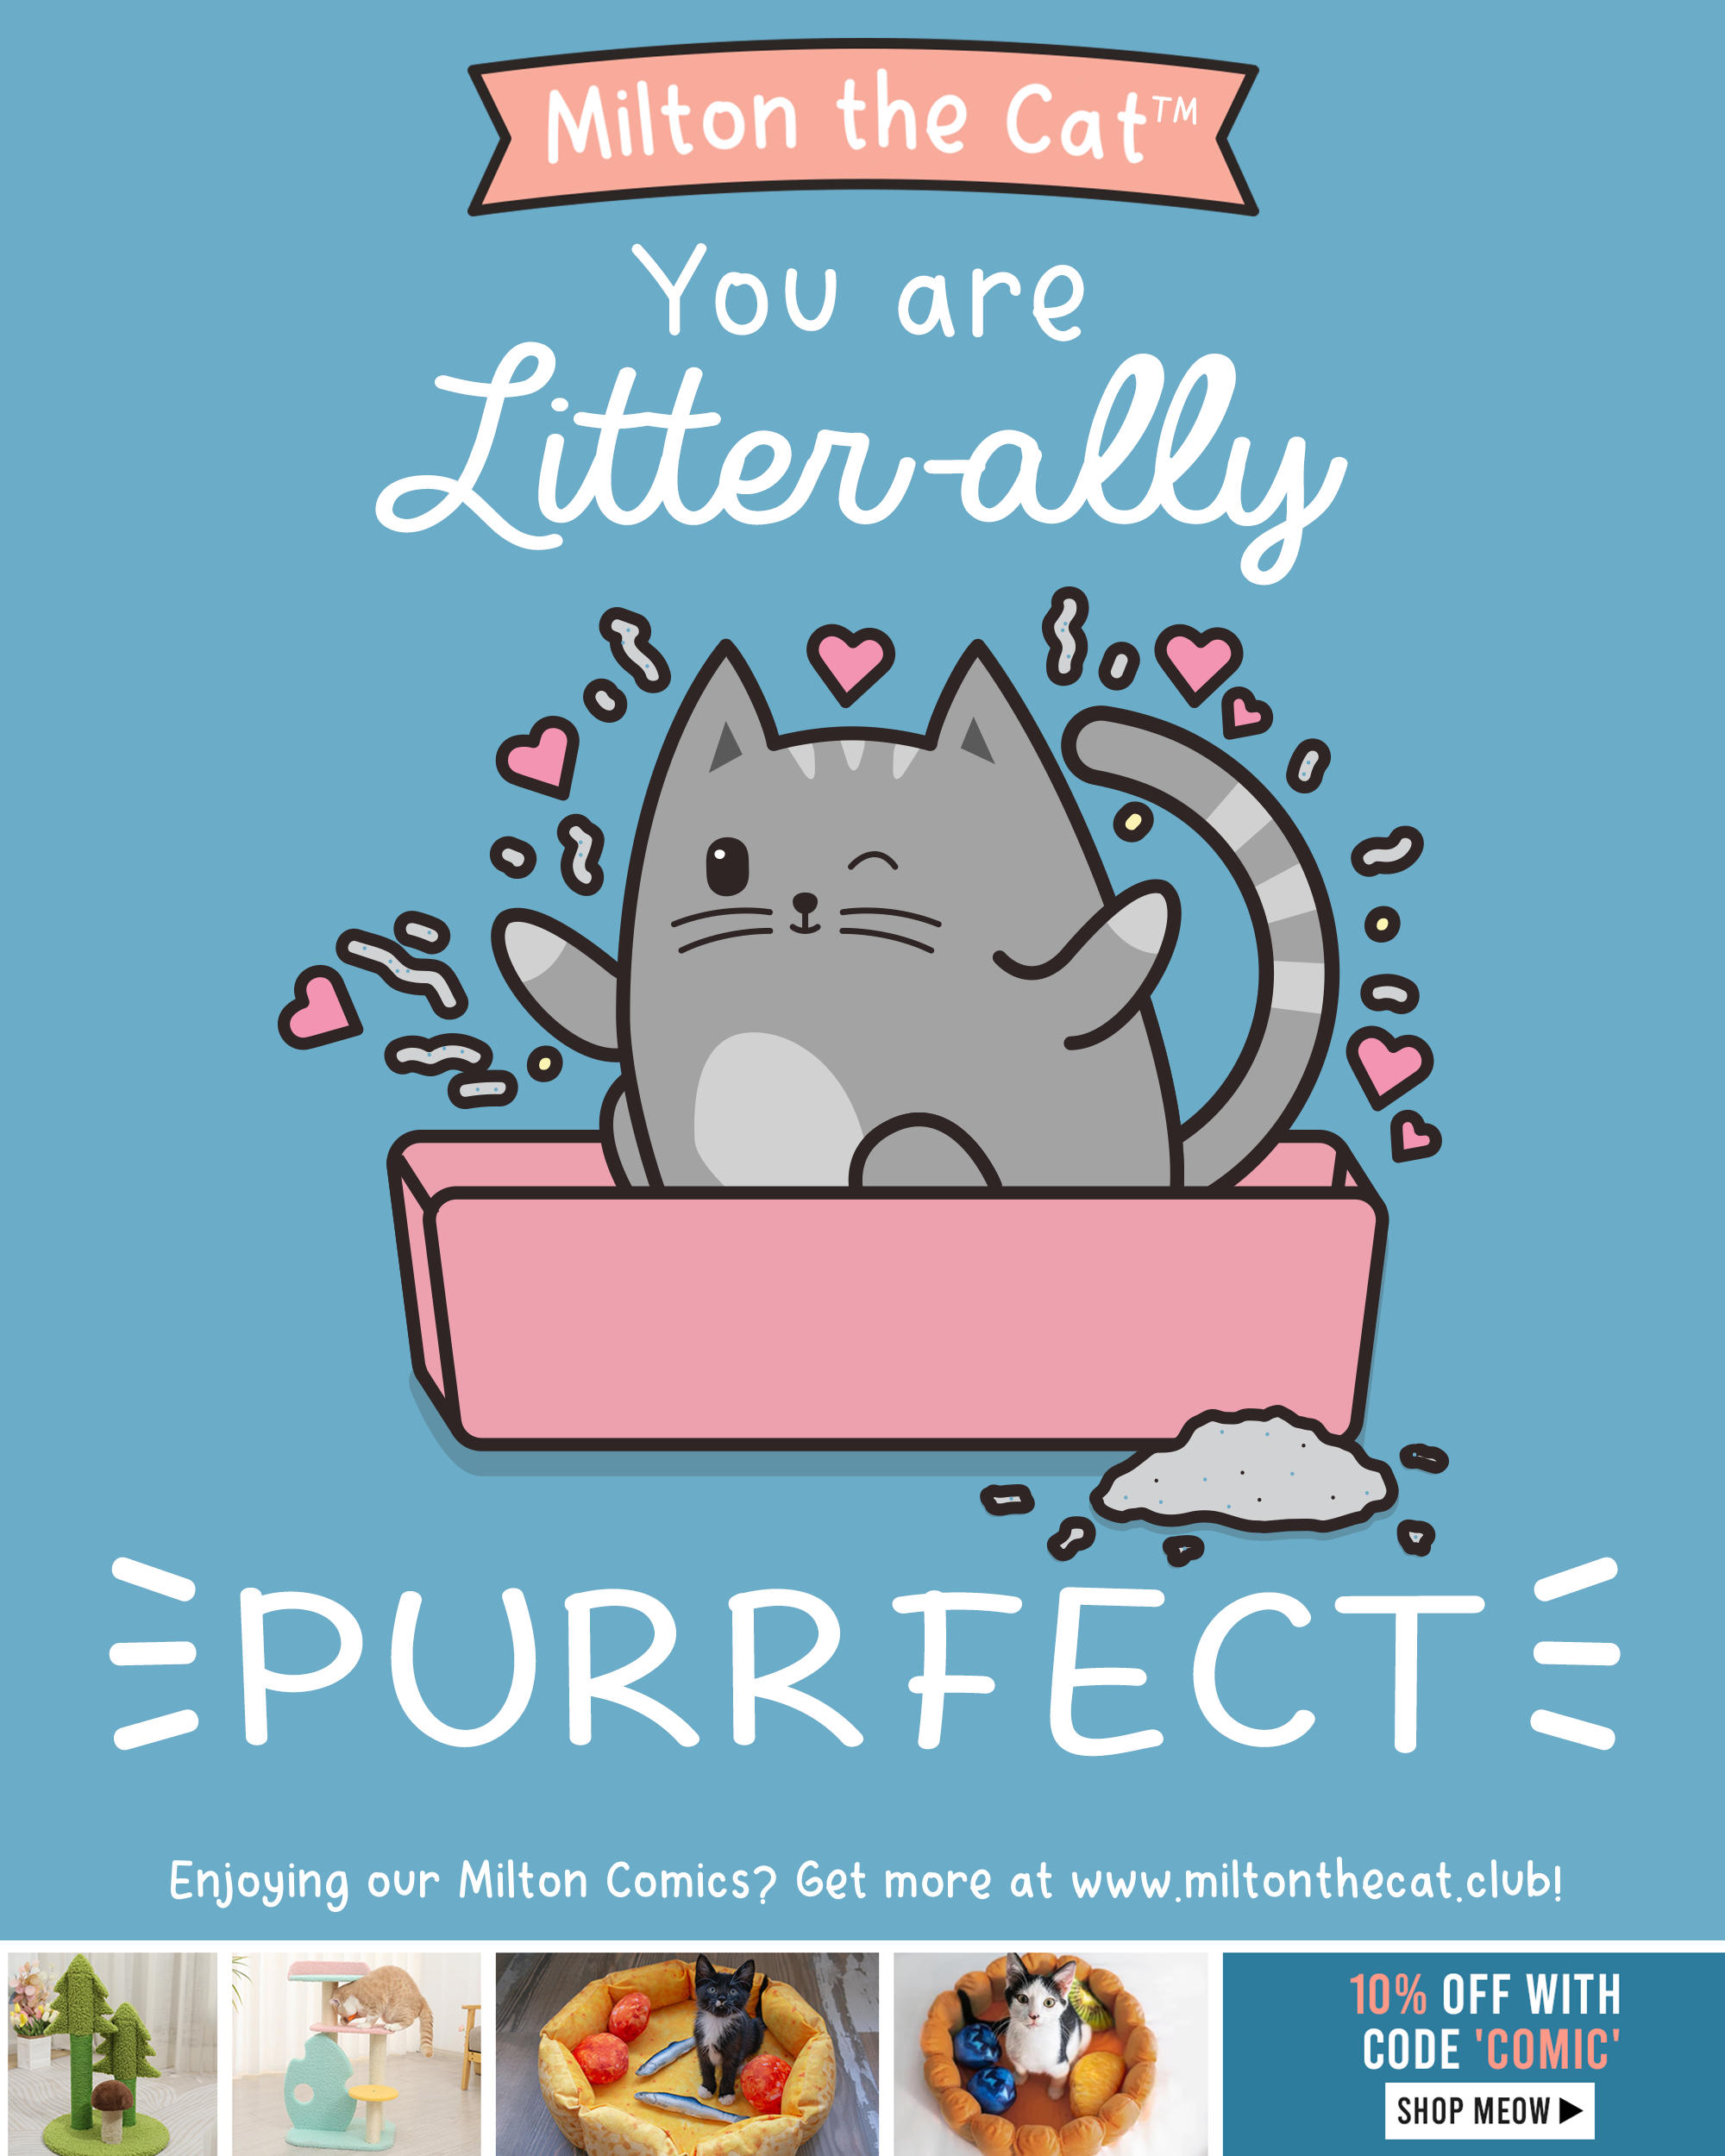 Text: You are litter-ally PURRfect. Illustration of Milton the Cat, a chubby gray tabby cat, in a litter box tossing litter into the air like it is glitter, surrounded by Valentine's hearts.